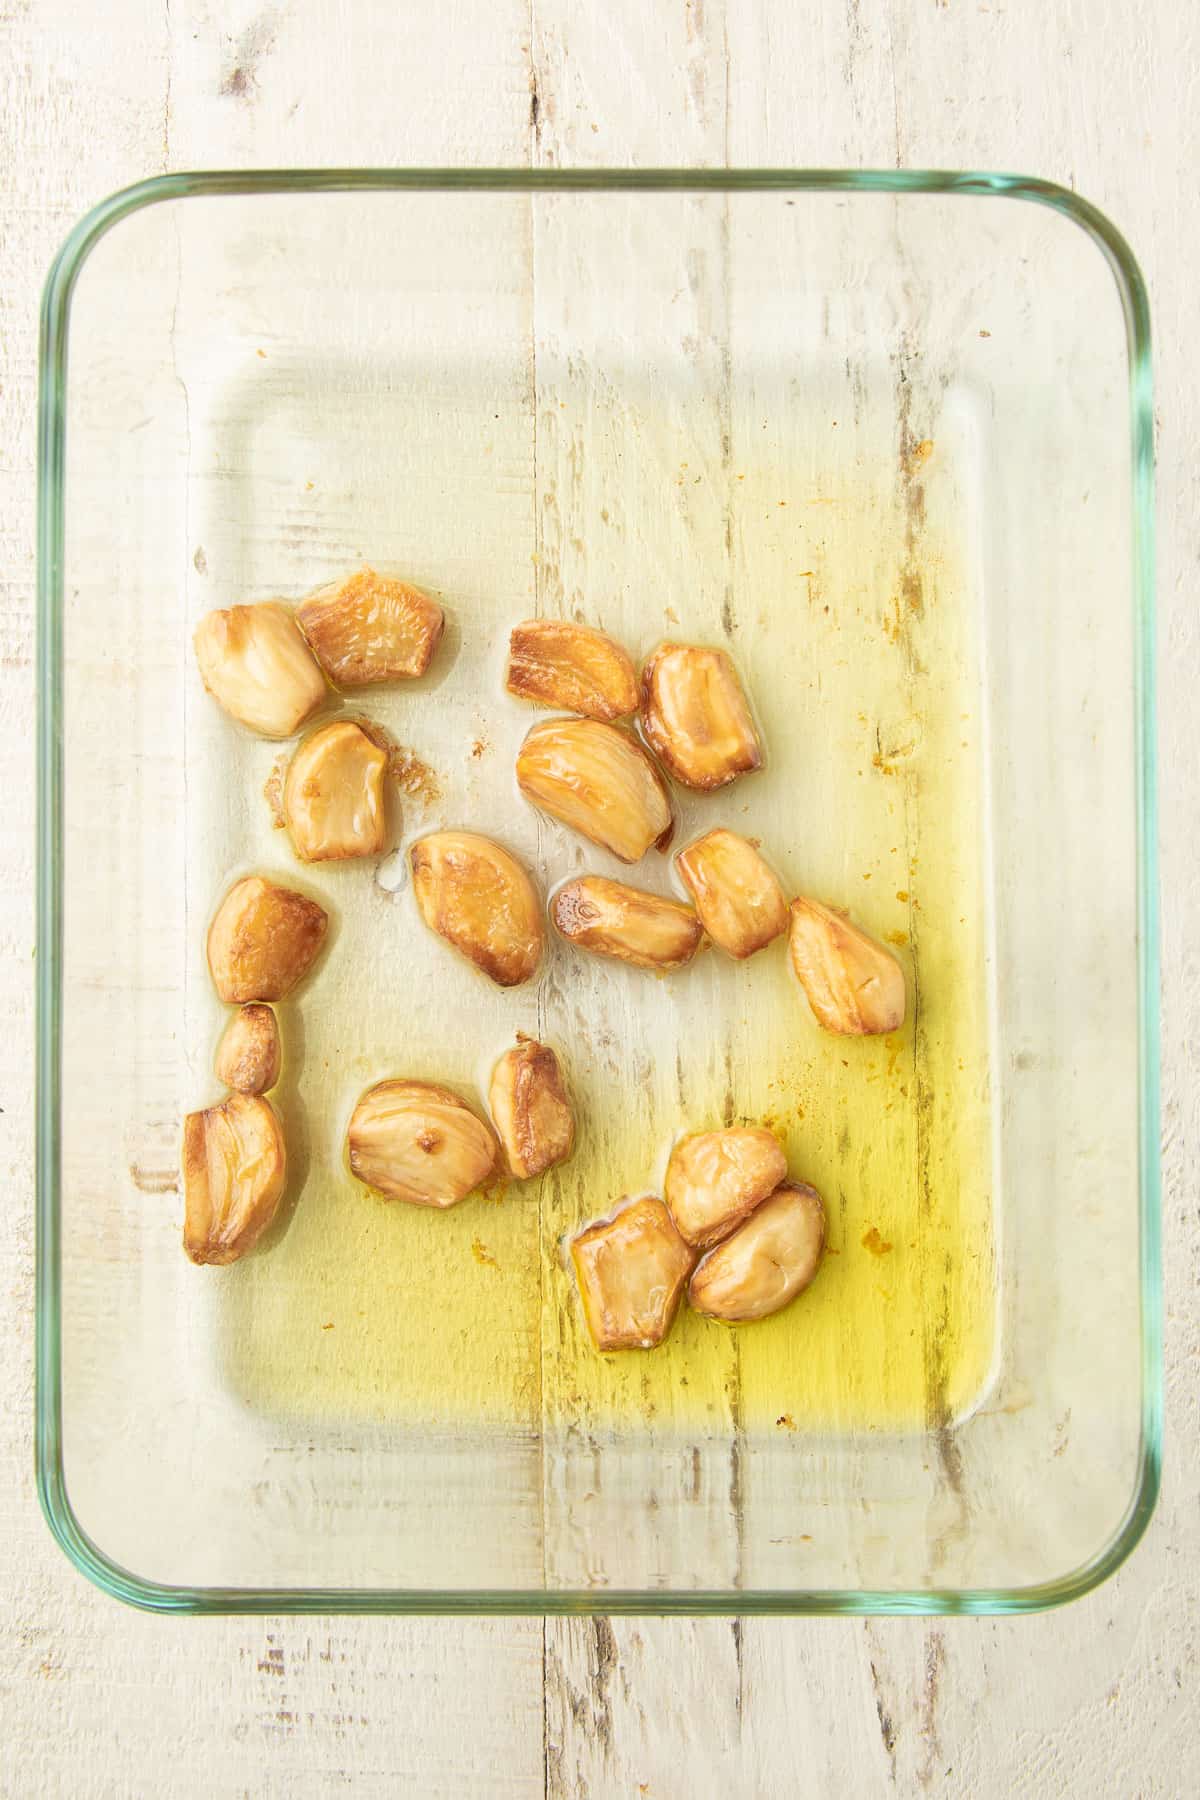 Roasted garlic and olive oil in a glass dish.